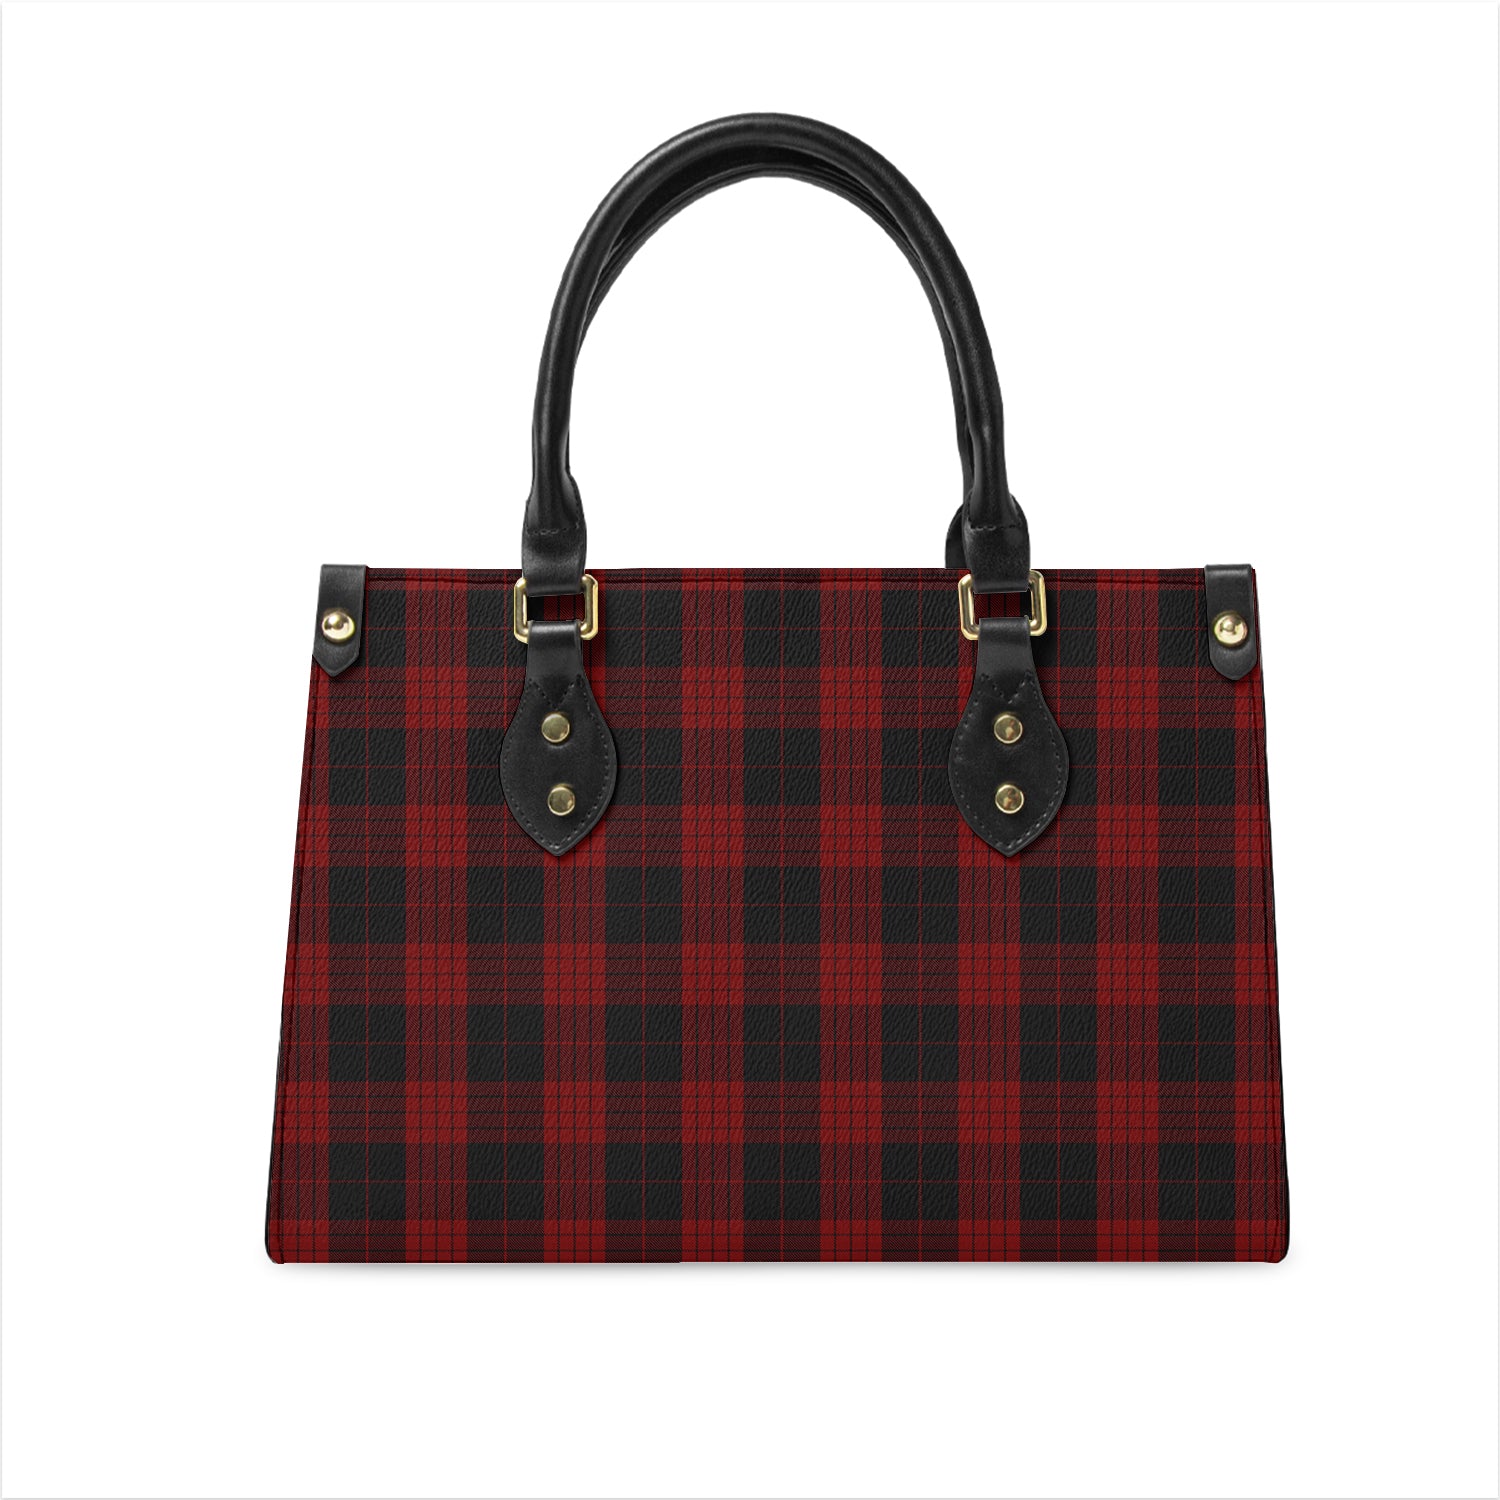 cameron-black-and-red-tartan-leather-bag